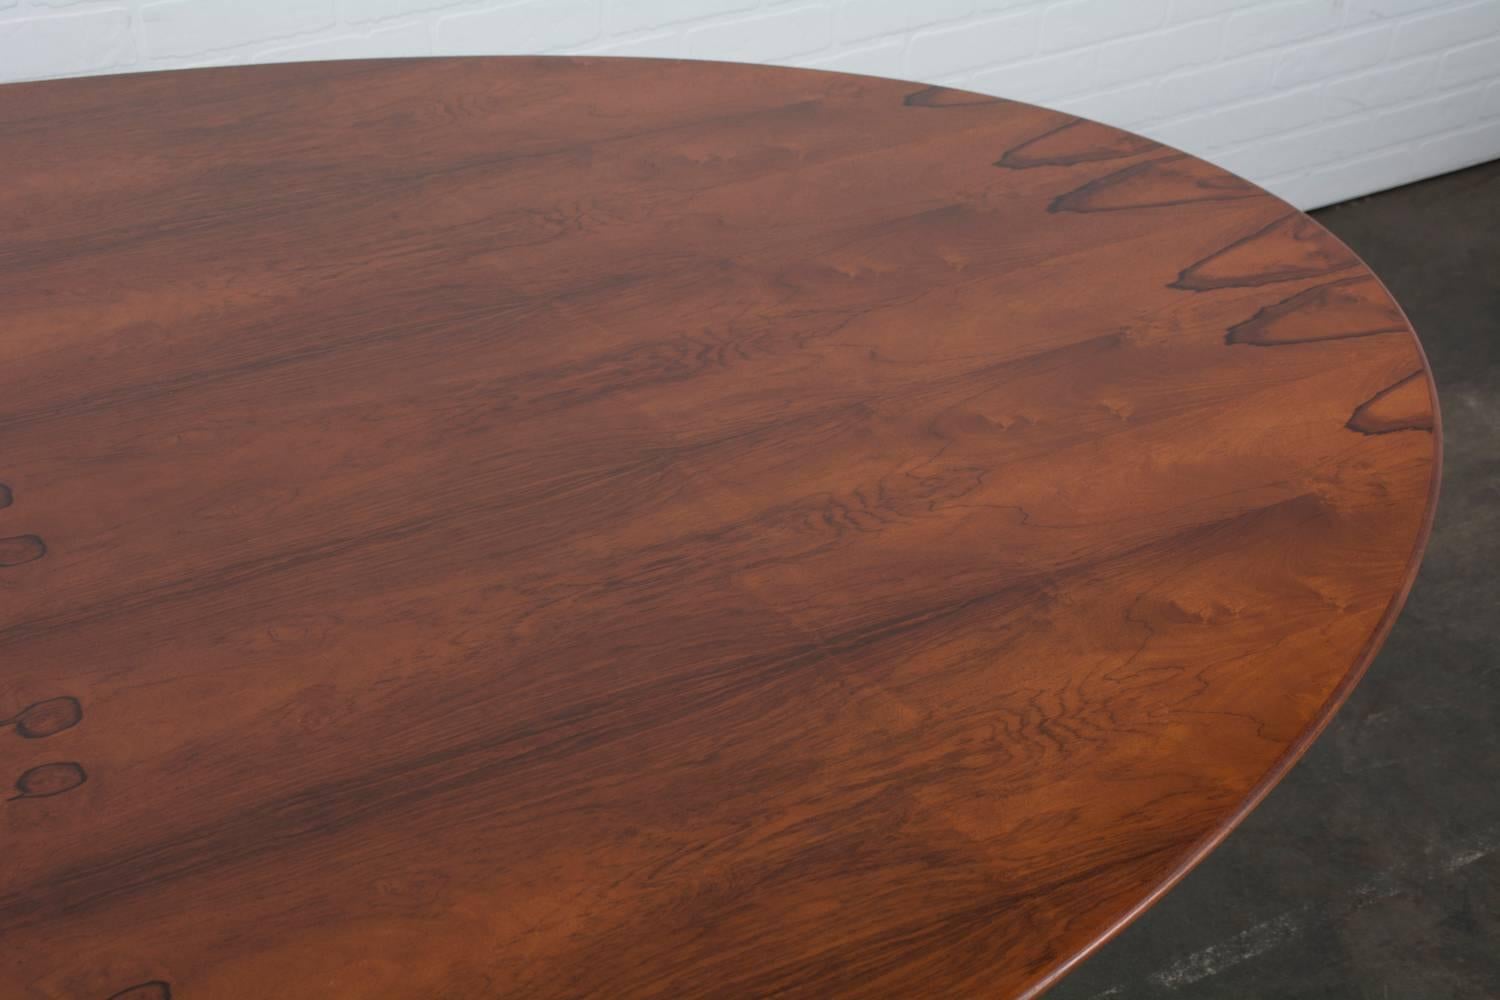 Bronzed Florence Knoll Oval Rosewood Table with Bronze Base